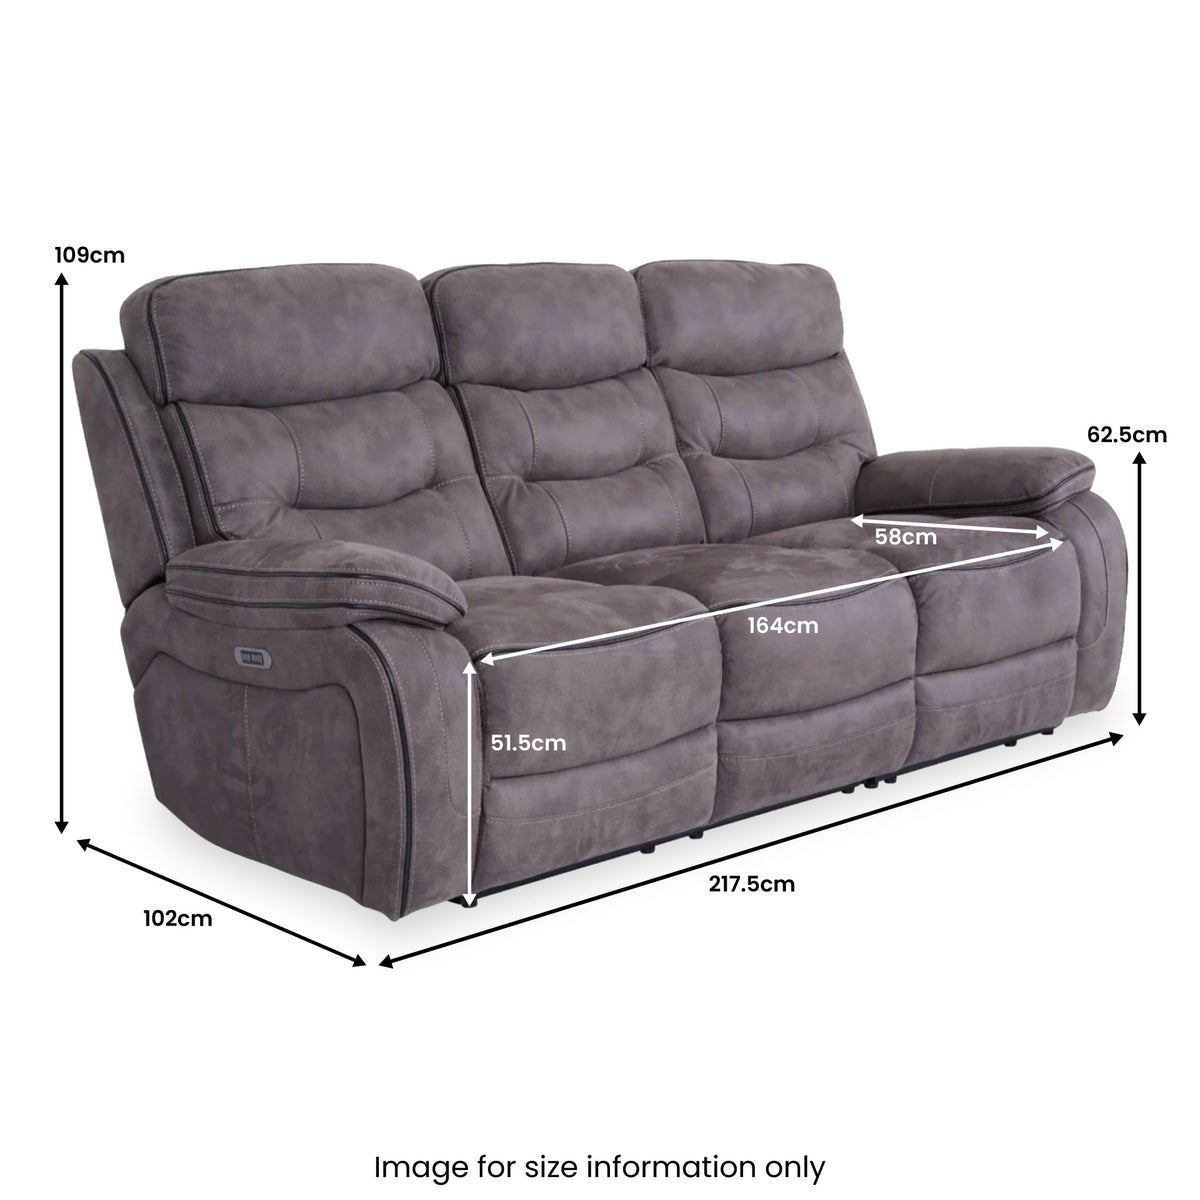 Stanford Charcoal Leather Electric Reclining 3 Seater Sofa dimensions